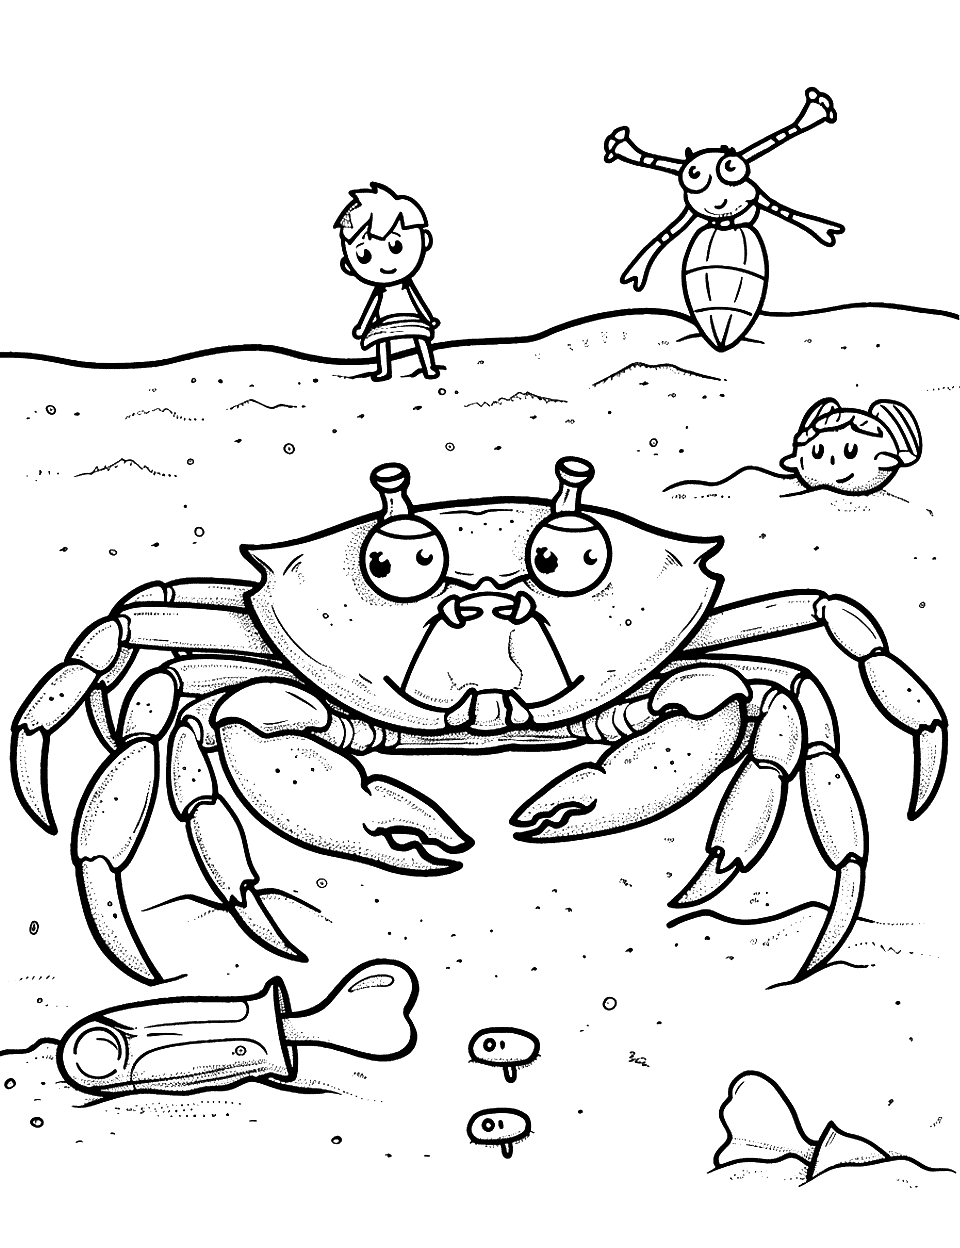 Crab and Beach Toys Coloring Page - A crab interacting curiously with a collection of children’s beach toys left in the sand.